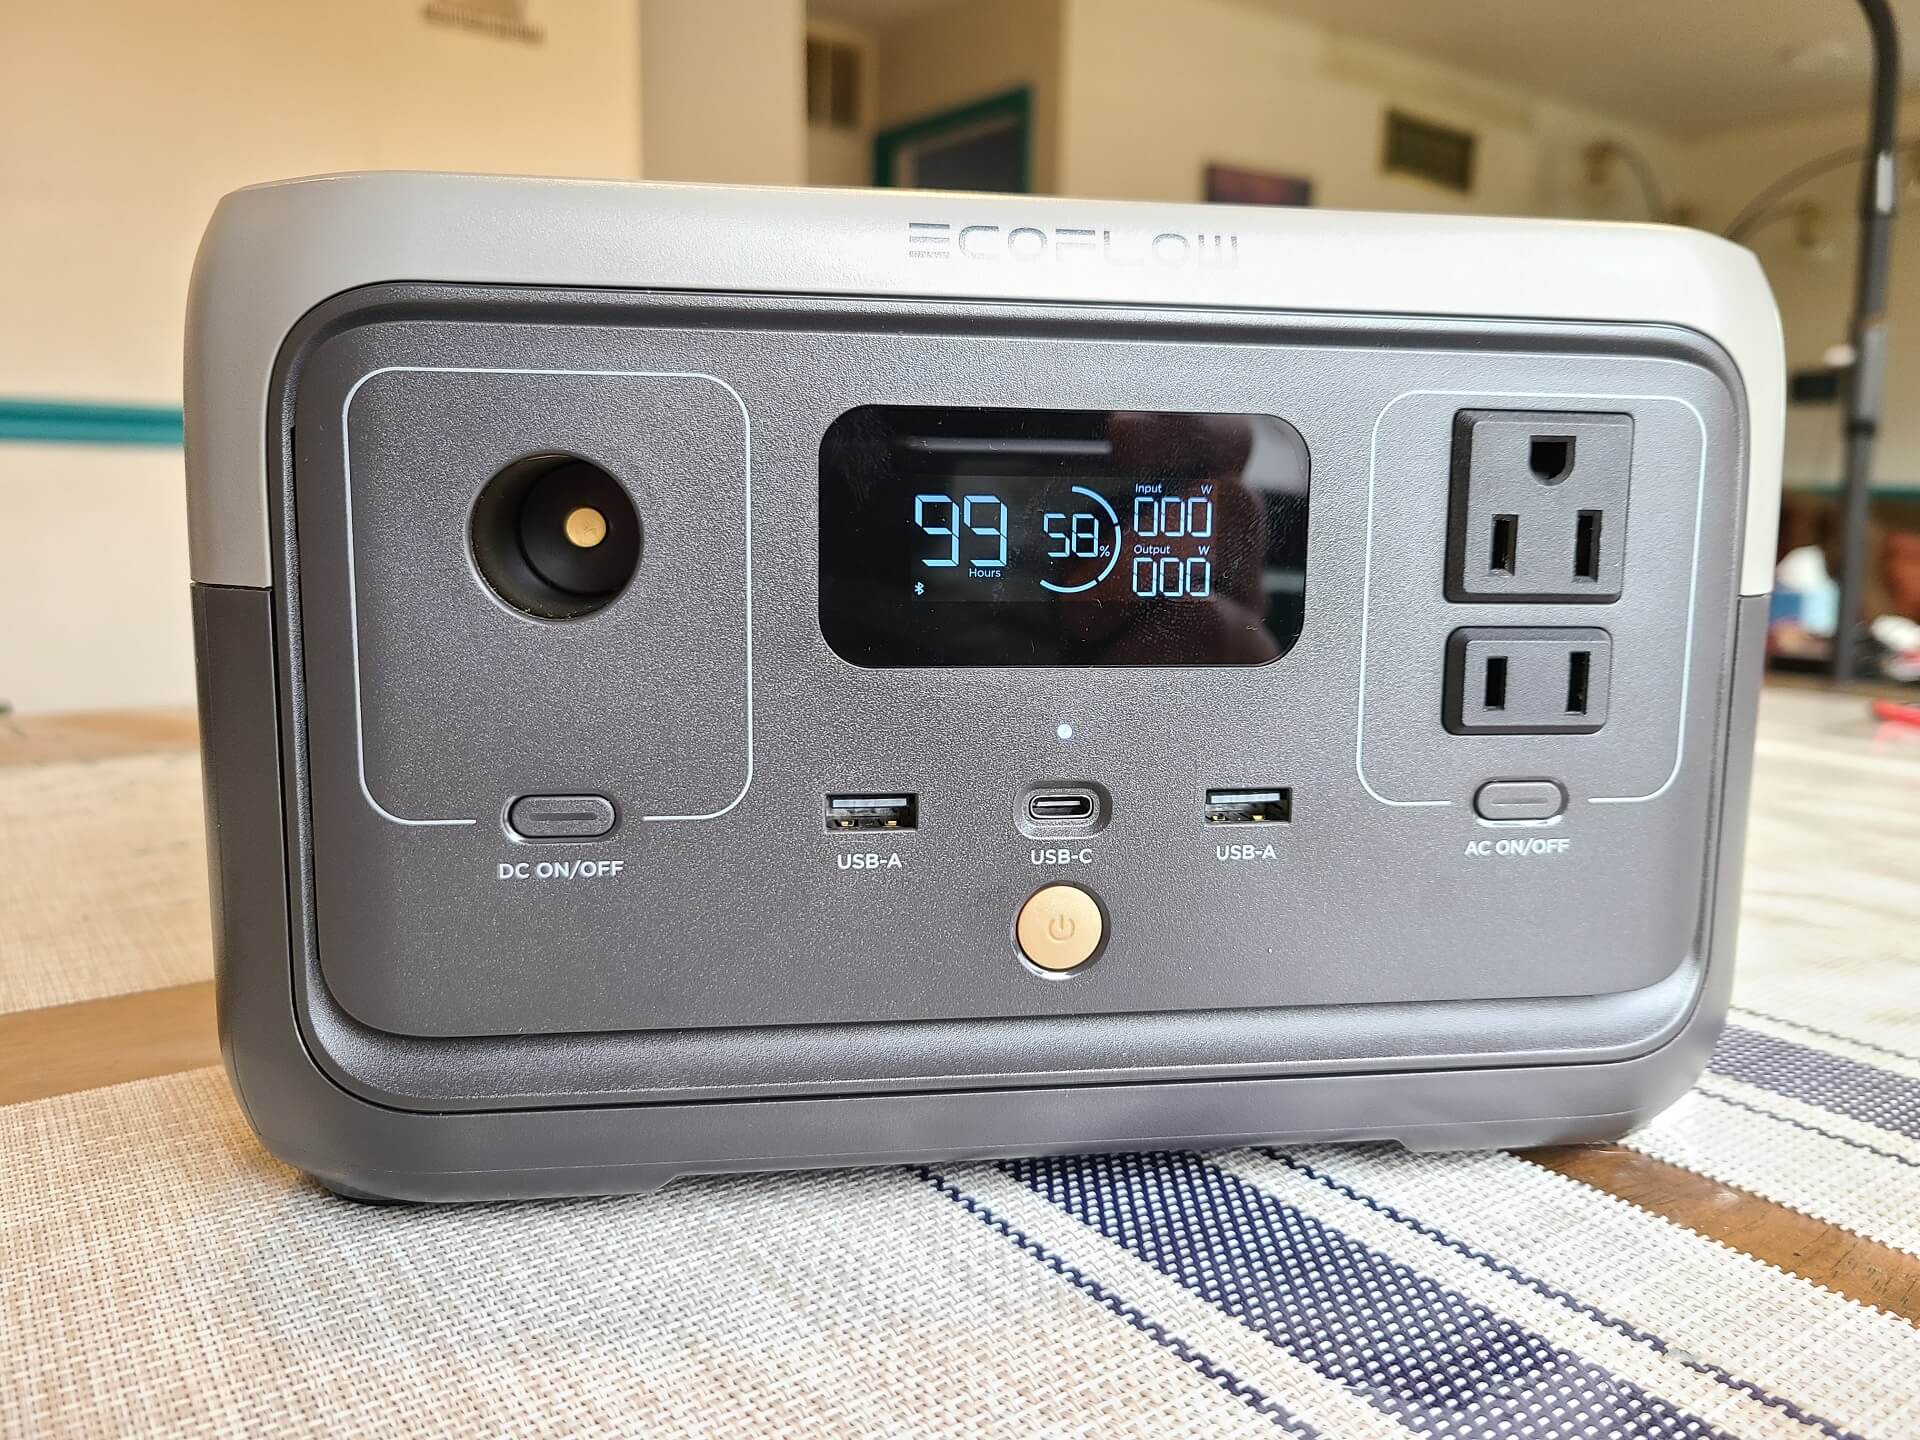 The Ecoflow River 2 256Wh LiFePO4 Power Station Is Down to $178 - IGN